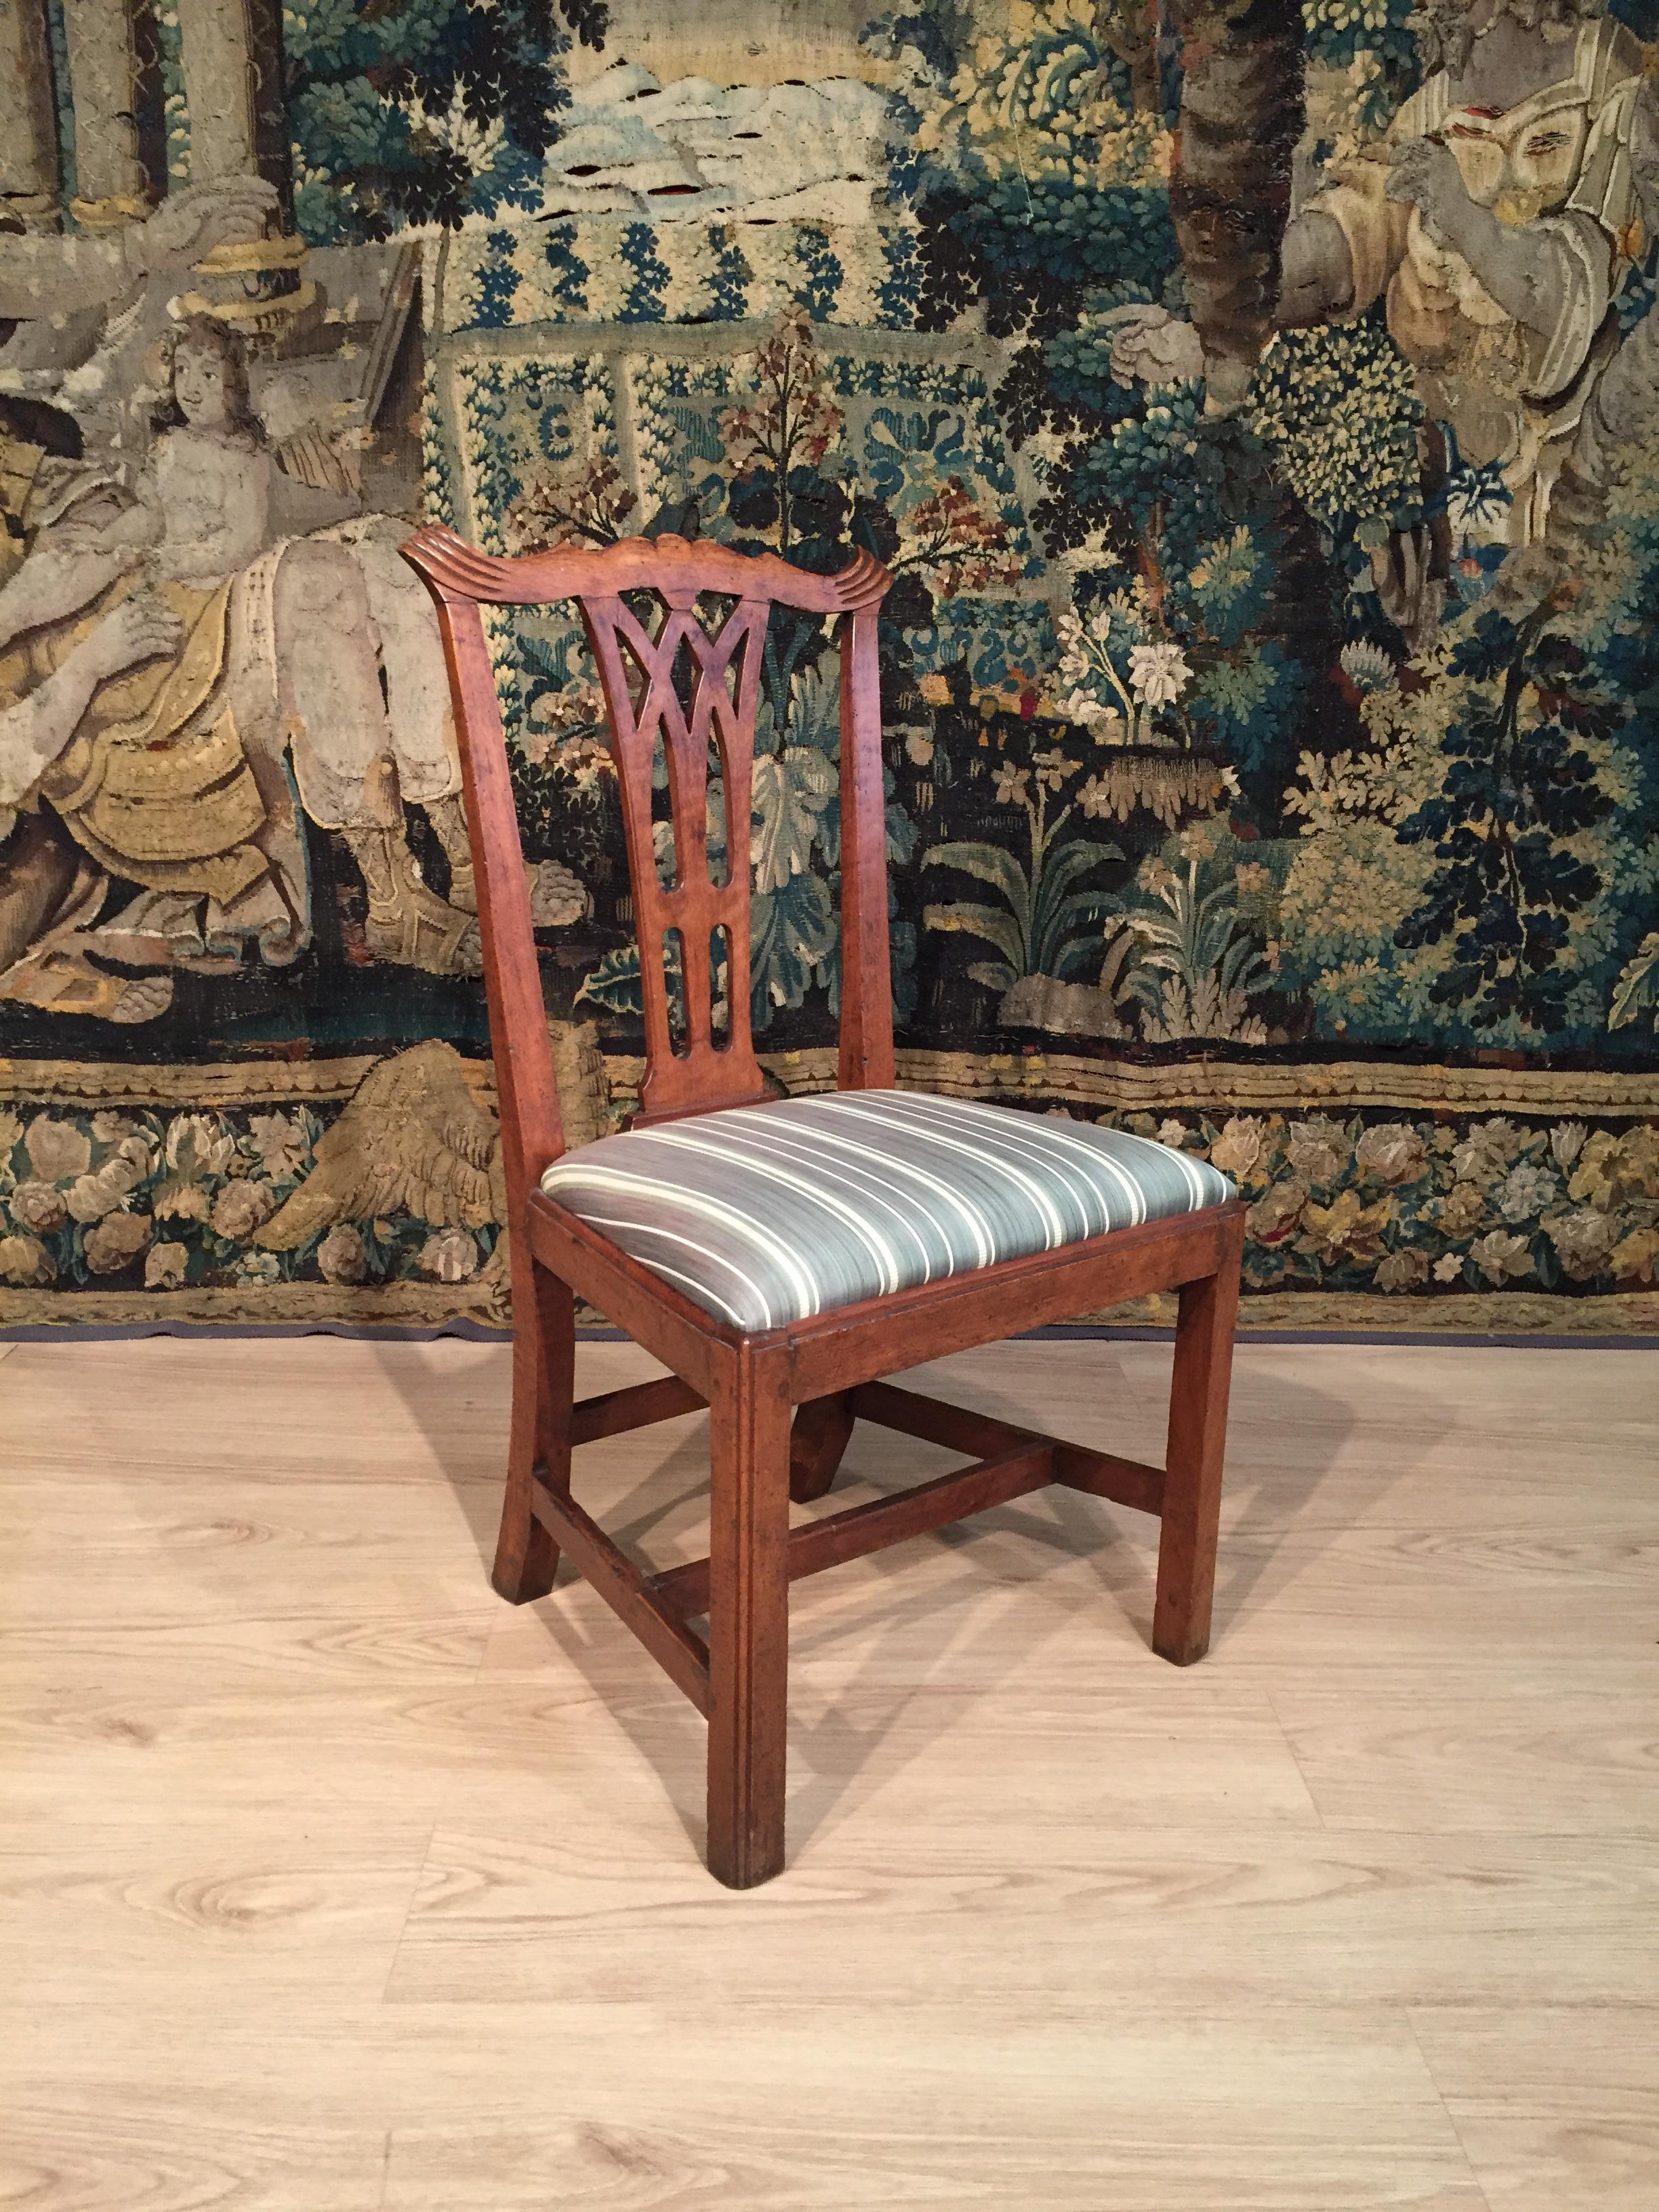 Ten Italian carved walnut wood chairs. English taste,
Tuscany, Italy, 18th century

This group of ten chairs was made of walnut wood in English style in the 18th century, in Tuscany.
Each chair has a open back. The wooden structure is carved and